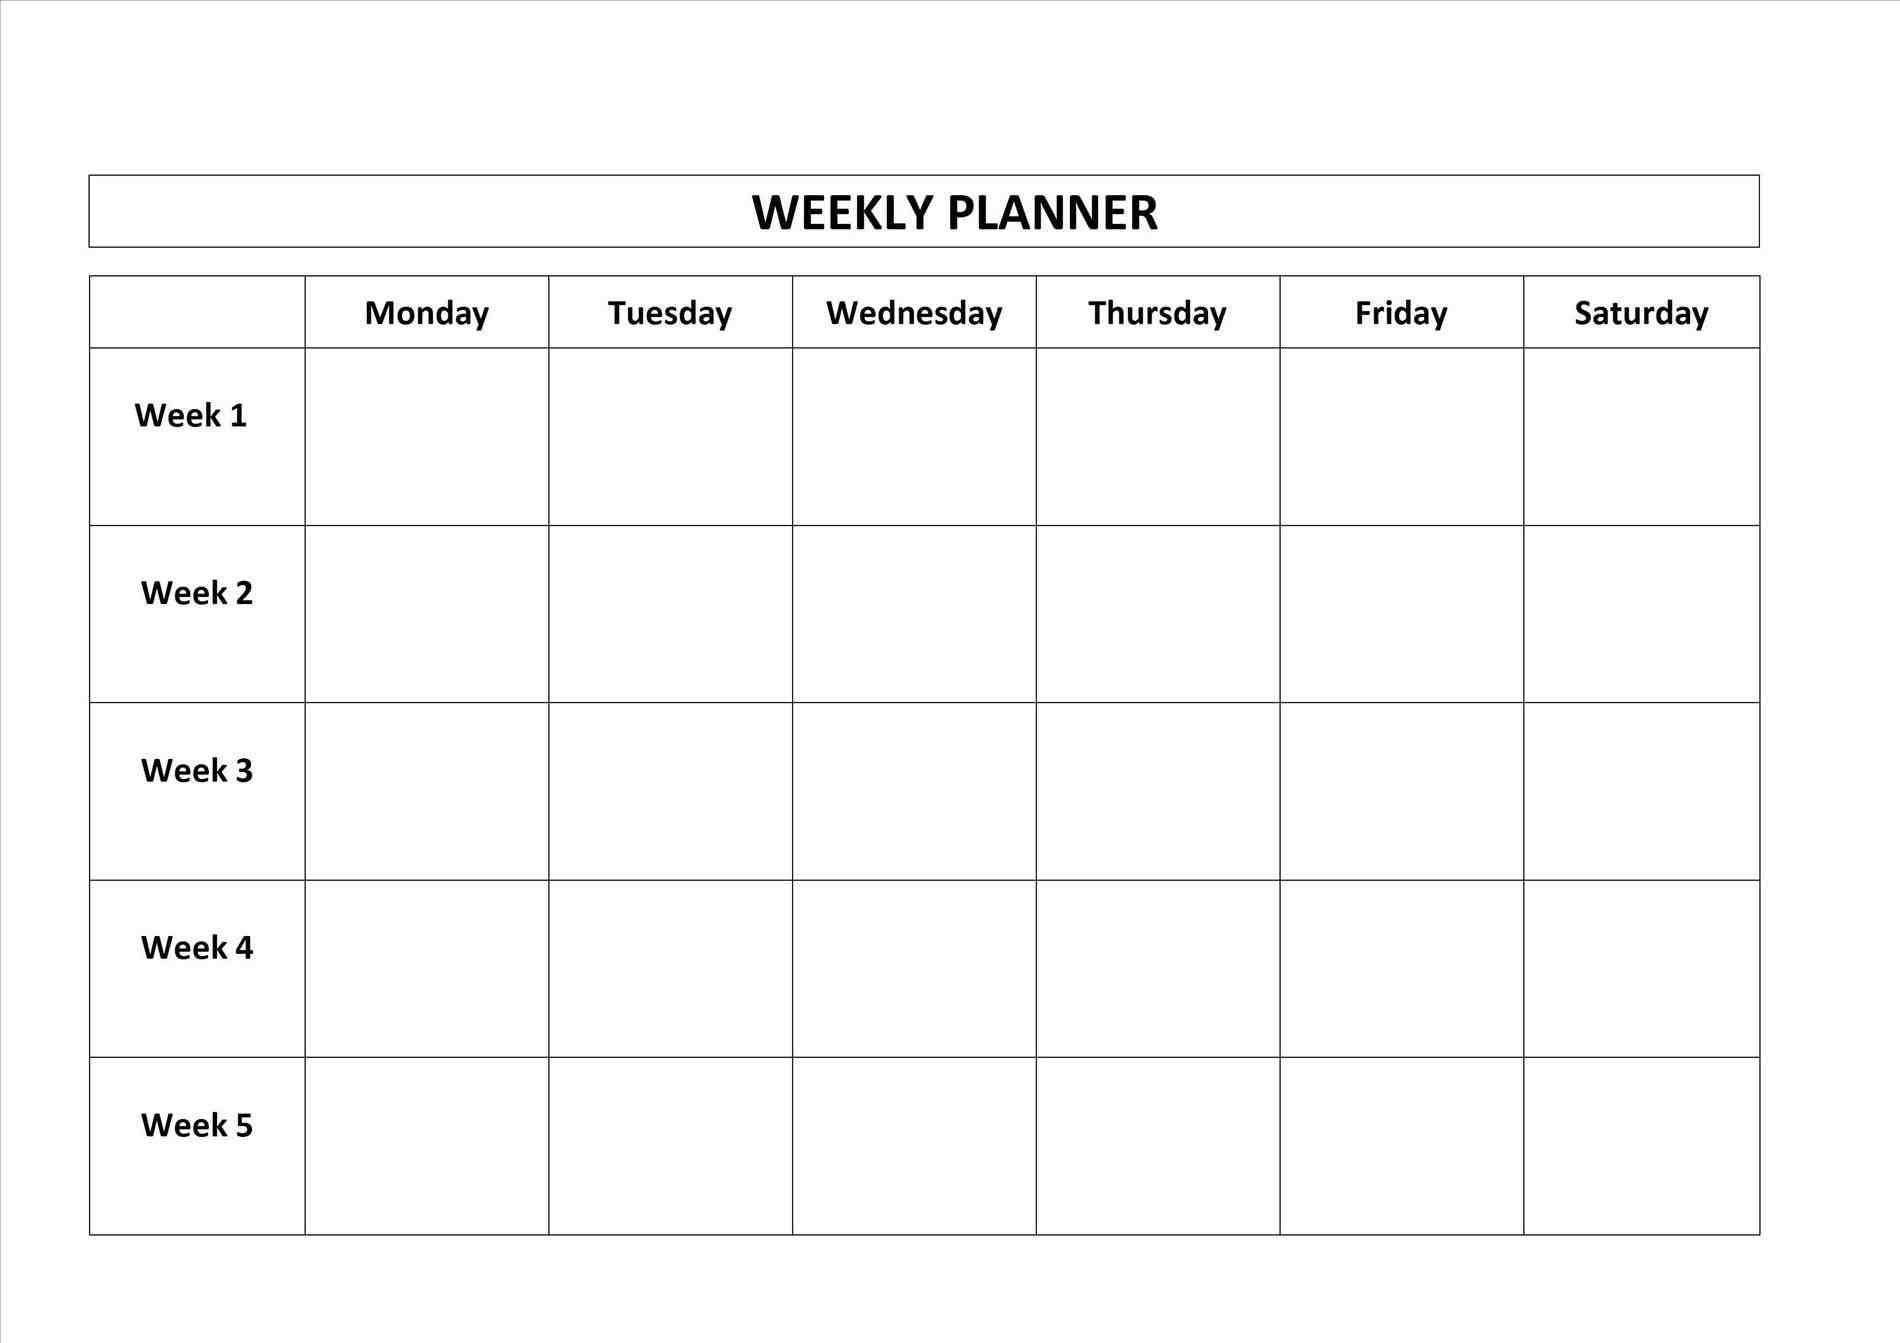 Monday To Friday Blank Calendar | Calendar Template Printable pertaining to On Monday To Friday